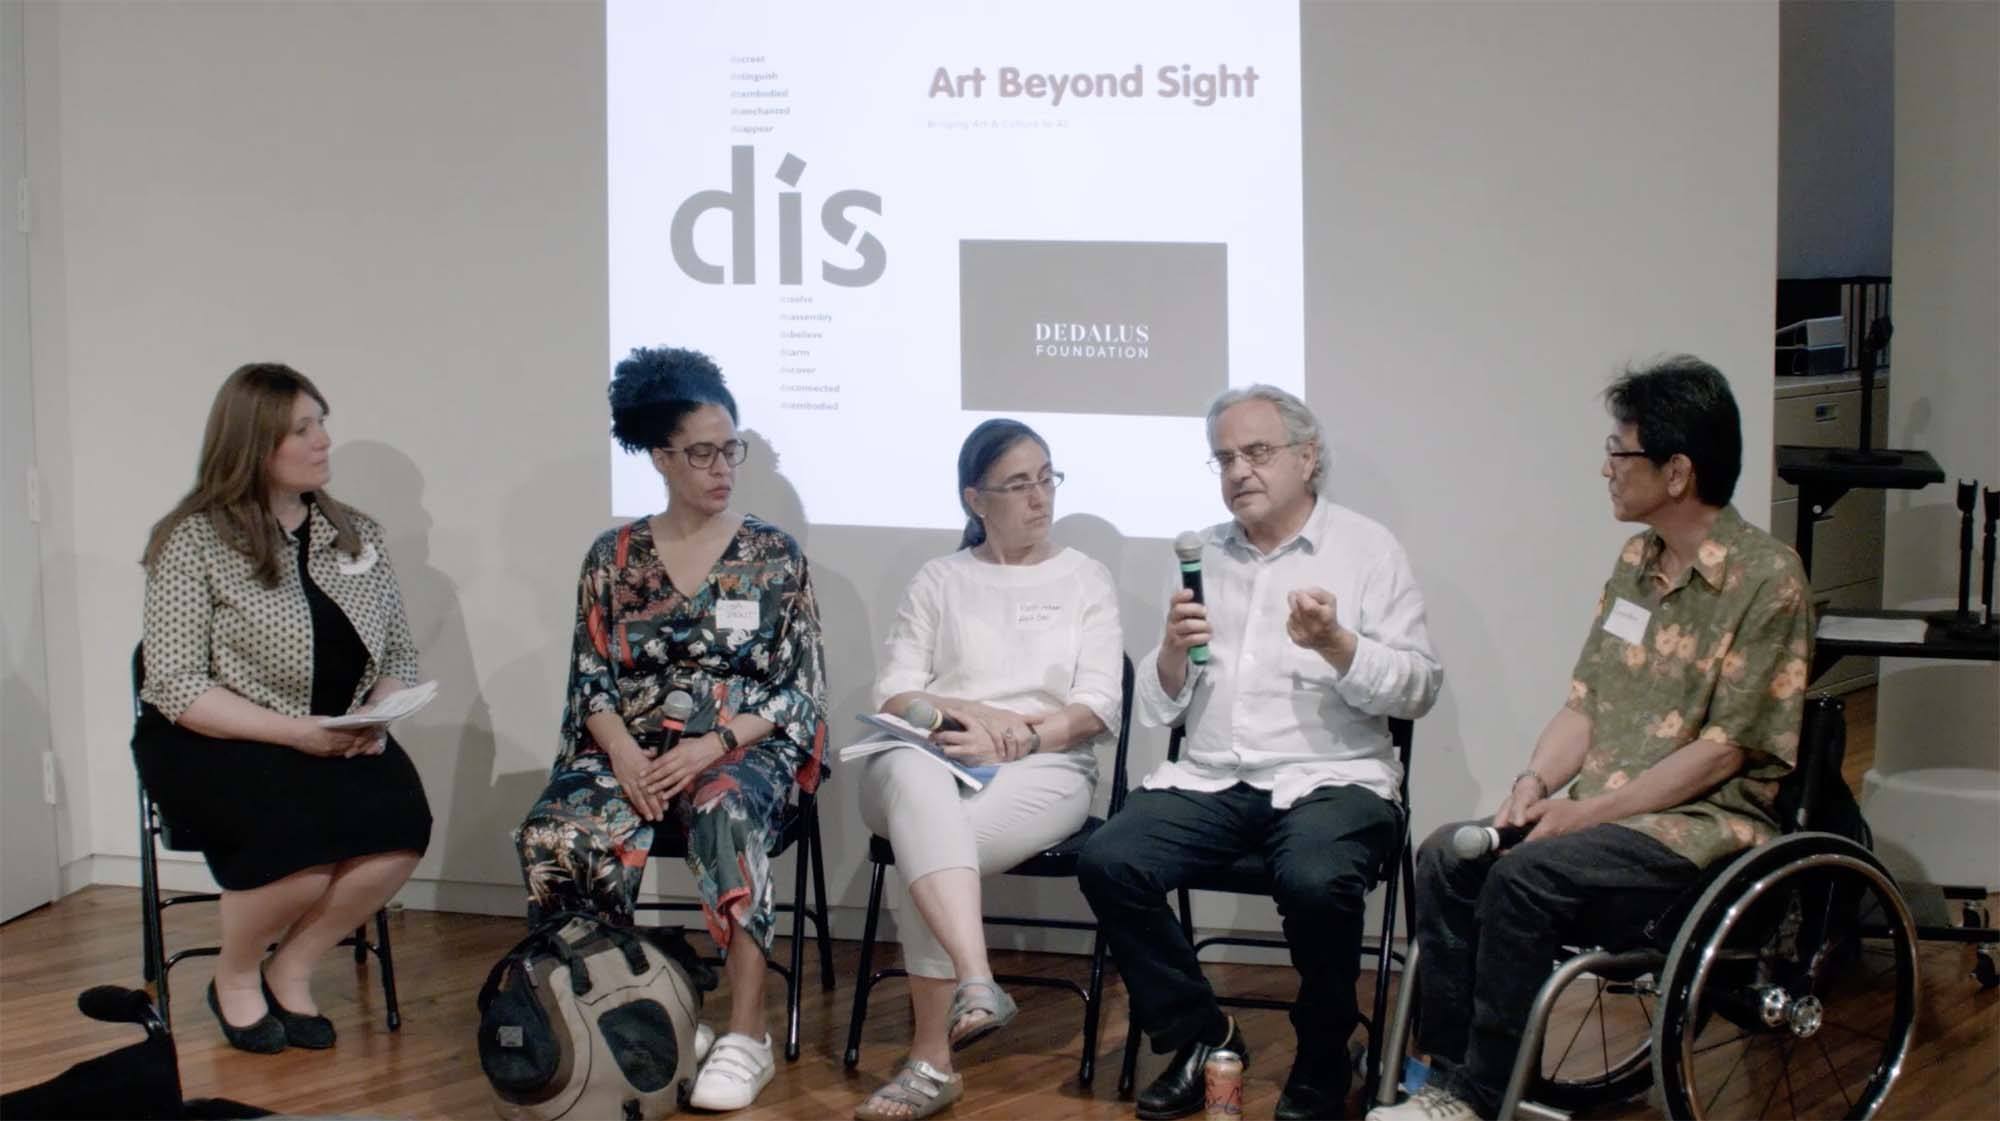 Art Beyond Sight’s Art and Disability Institute 2017 Symposium - Part 8